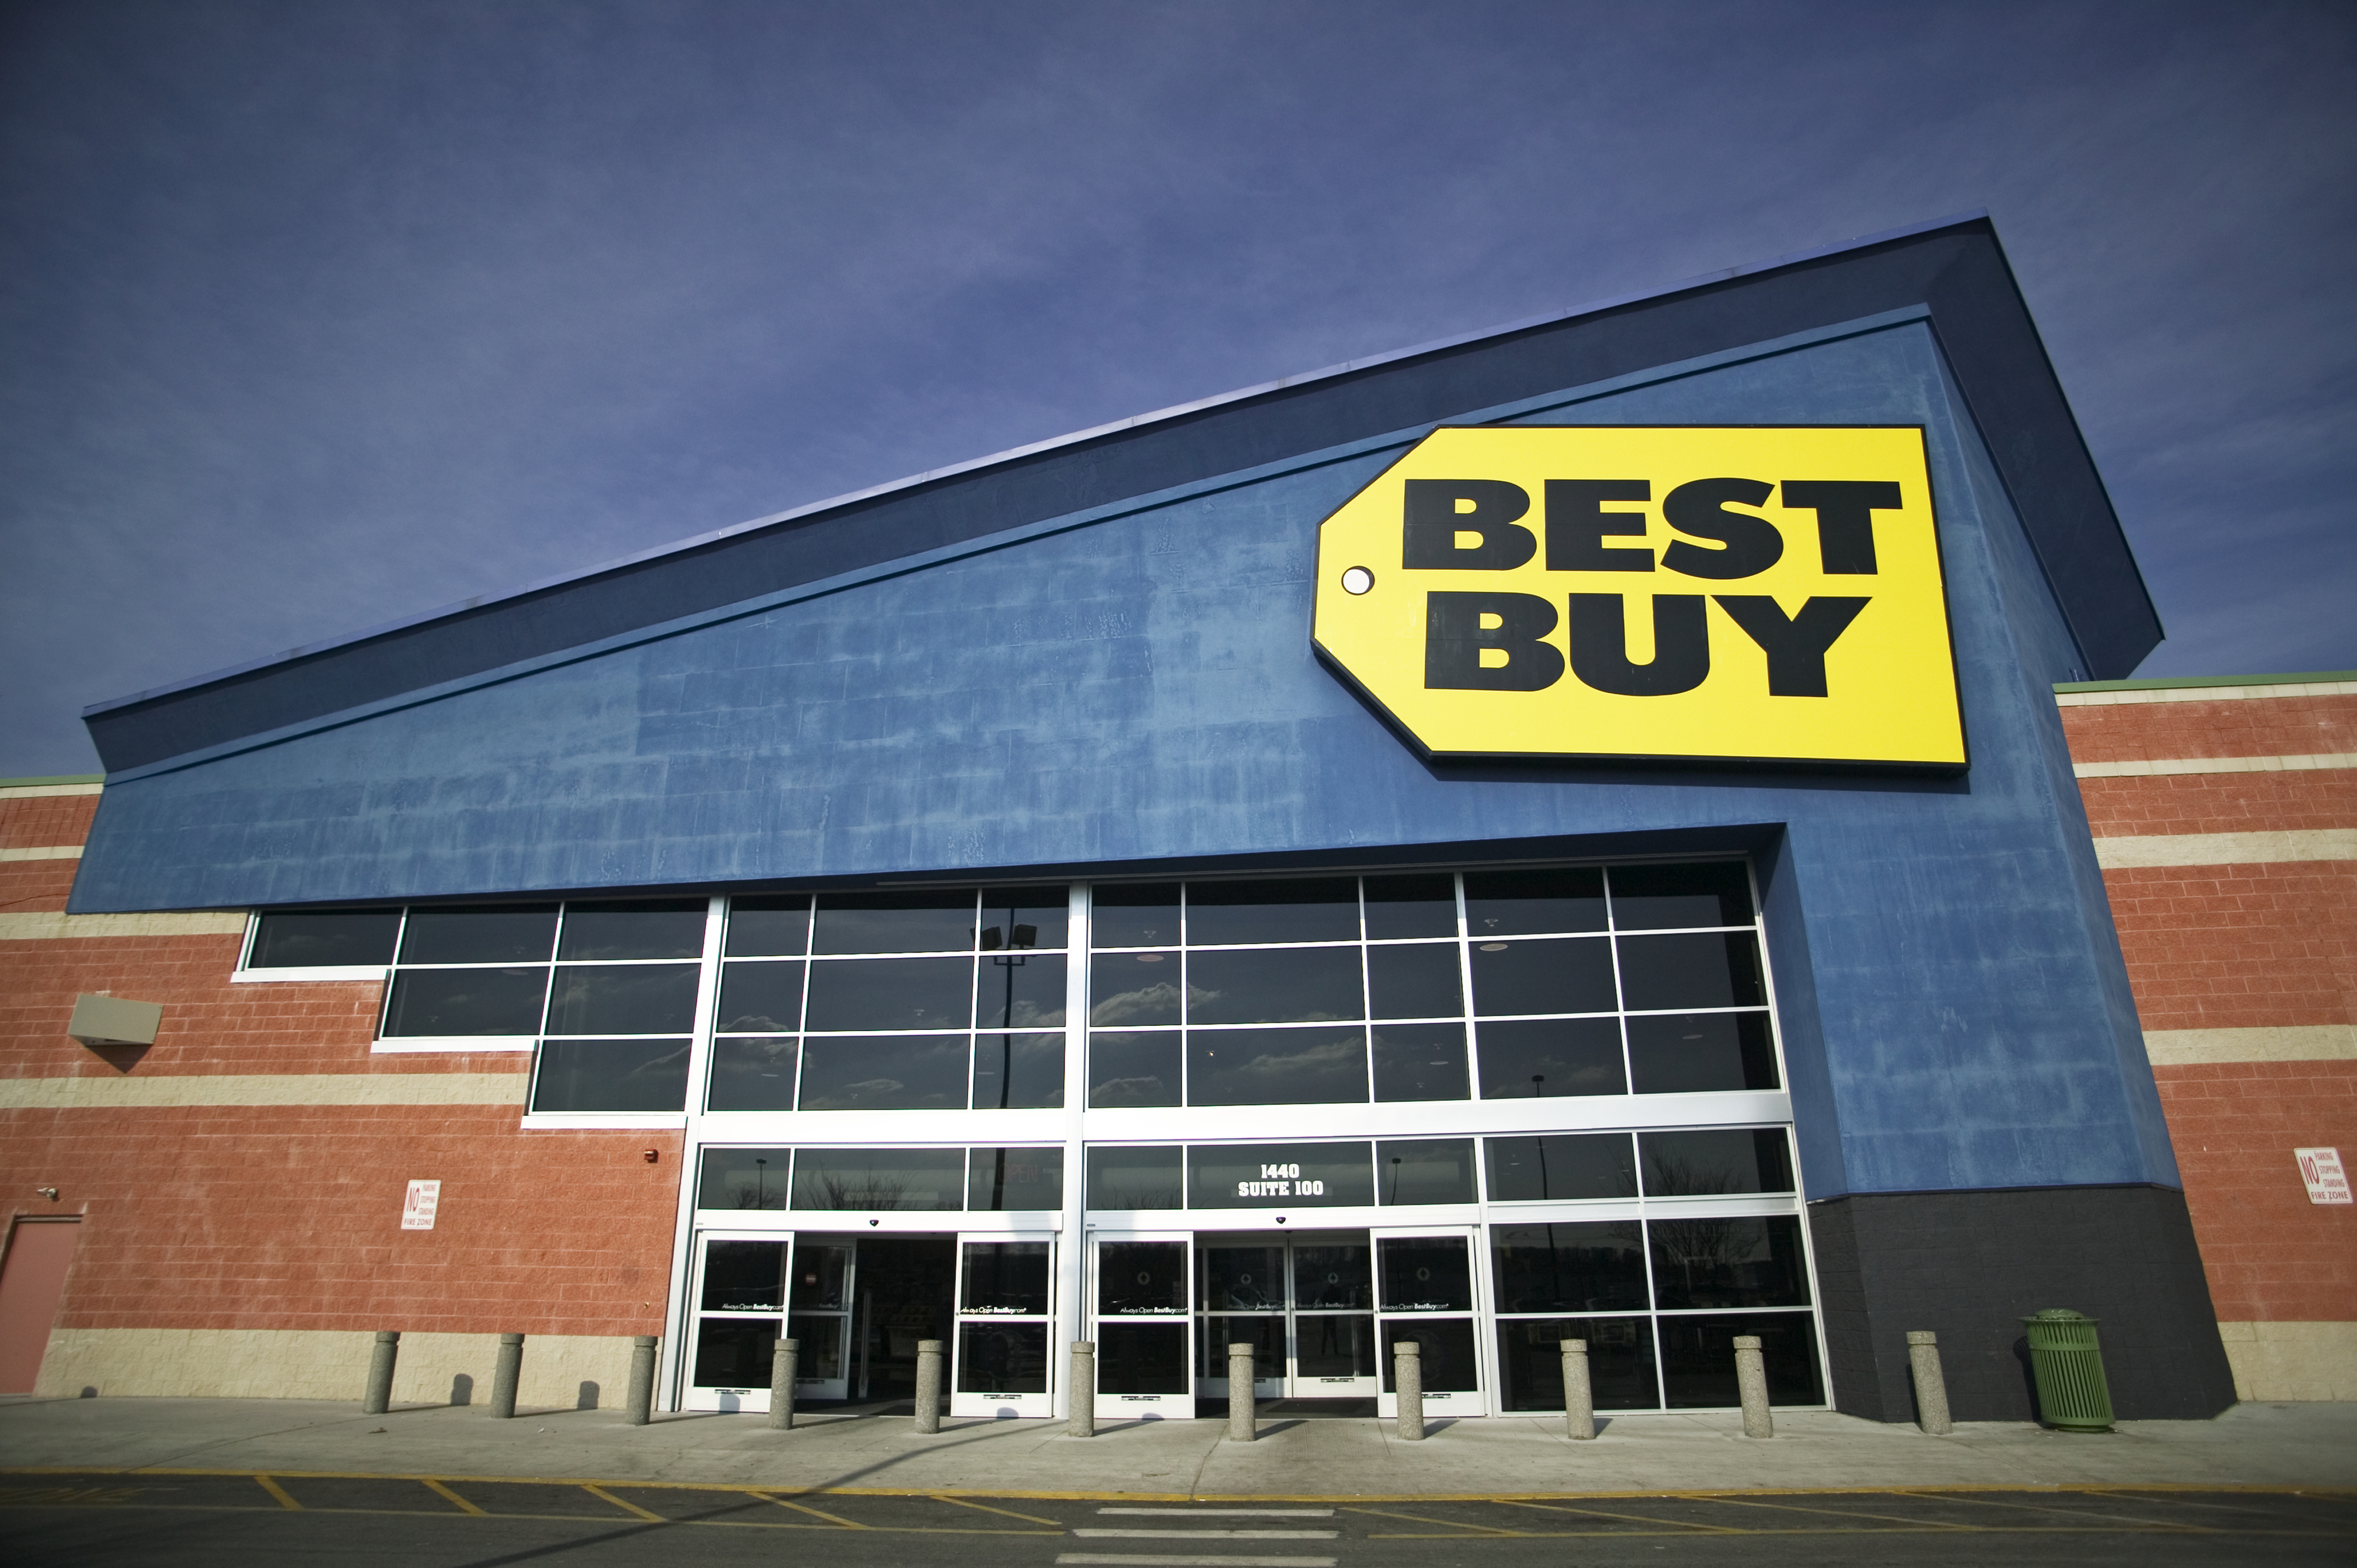 Exterior of a Best Buy location